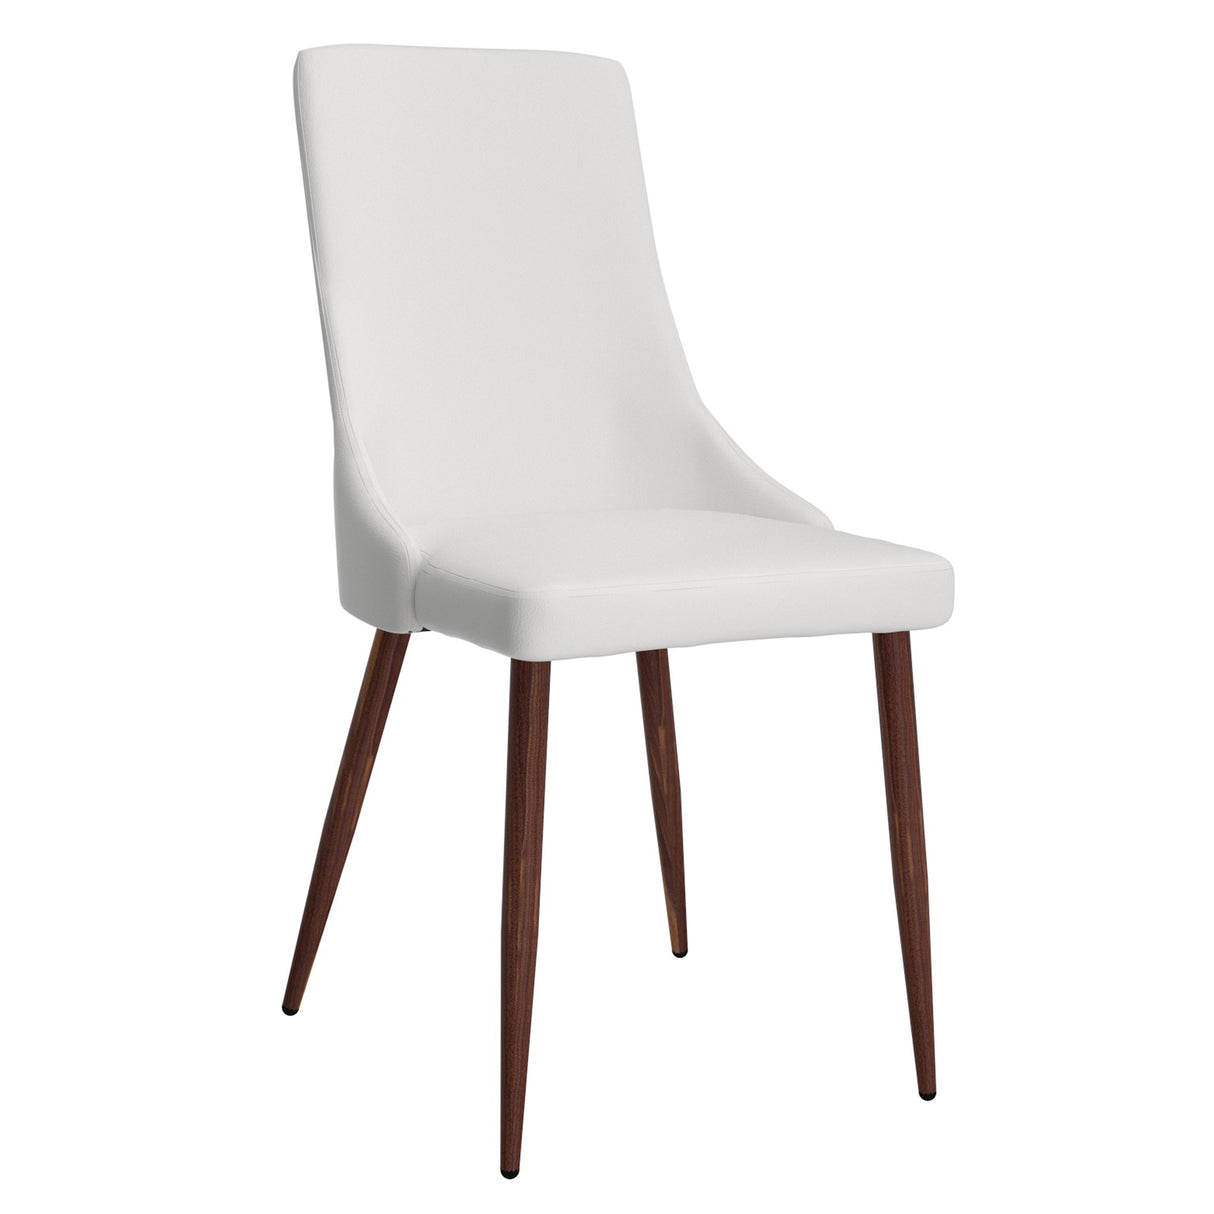 Cora Side Chair Pu White (Set of 2)